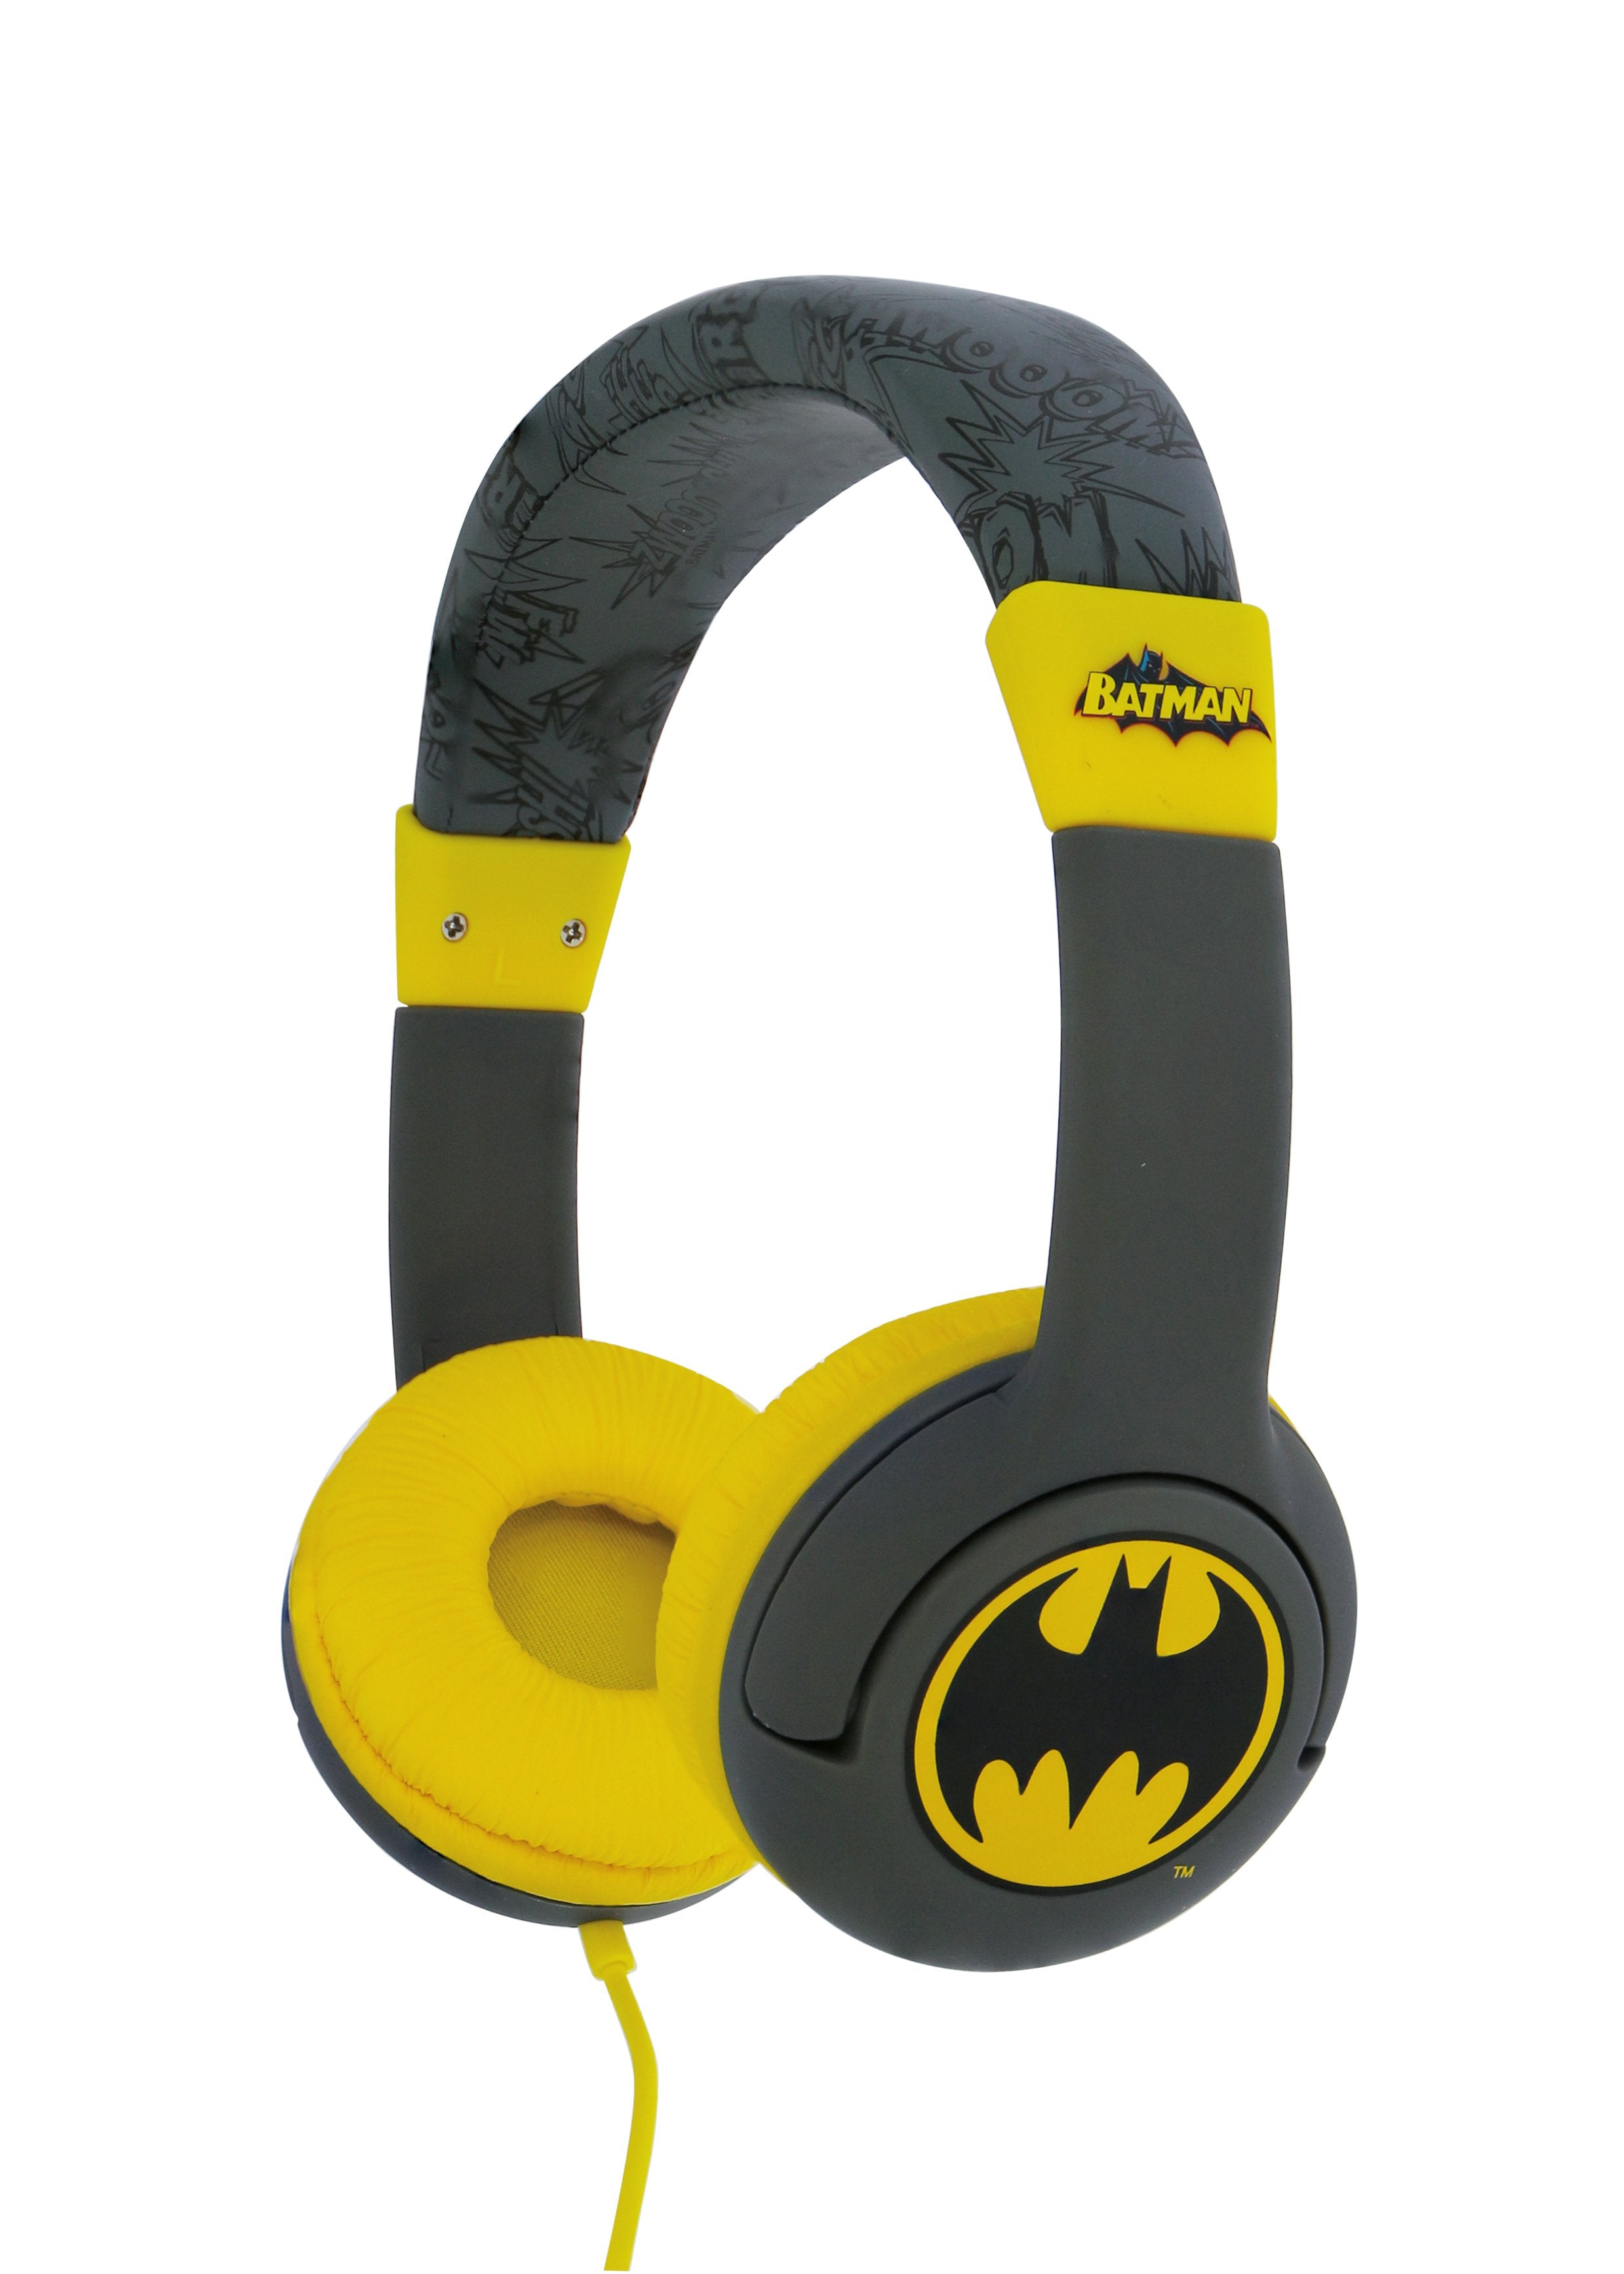 OTL Batman OnEar Wired Headphone - Safe Volume Limiting @85dB, Foldable & Adjustable, Superb Sound Quality,  Works w/ Smartphones, Tablets, Ninetendo Switch, Laptops & devices w/ 3.5mm port - Signal